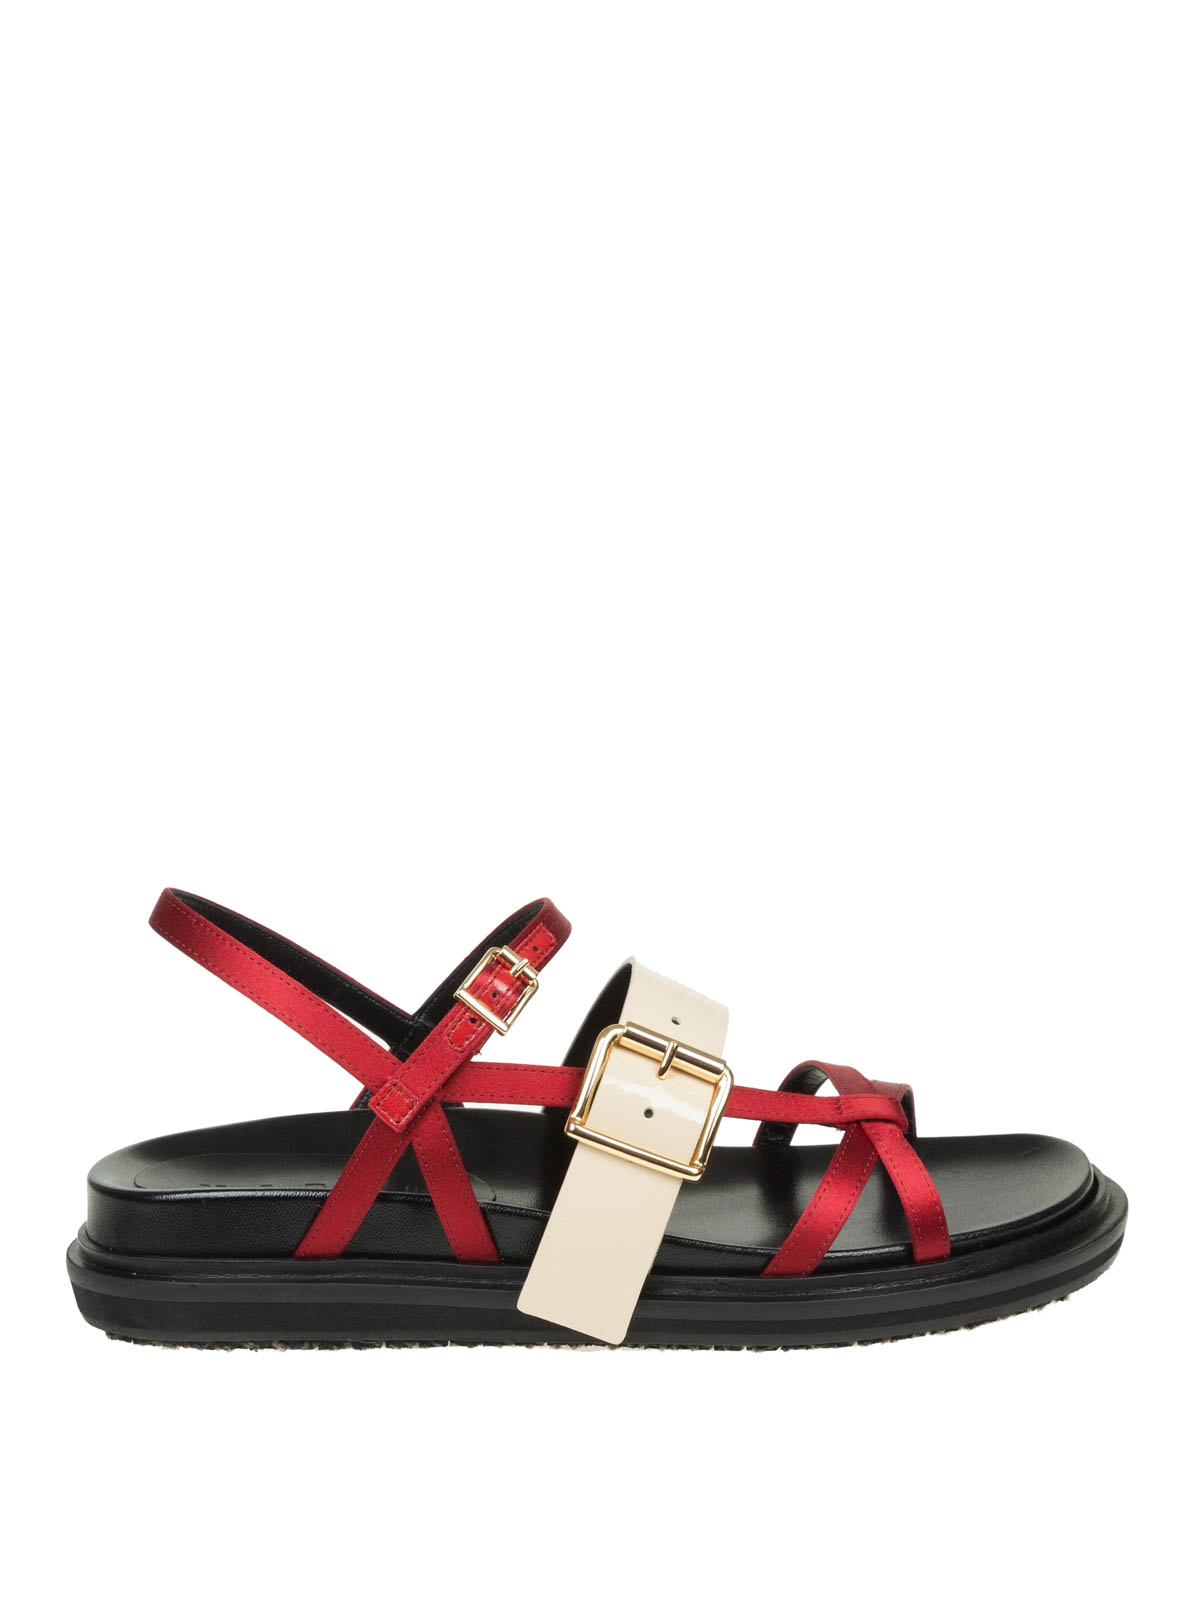 Sandals Marni - Two-tone strappy flat sandals - FBMS002301TV564ZL761